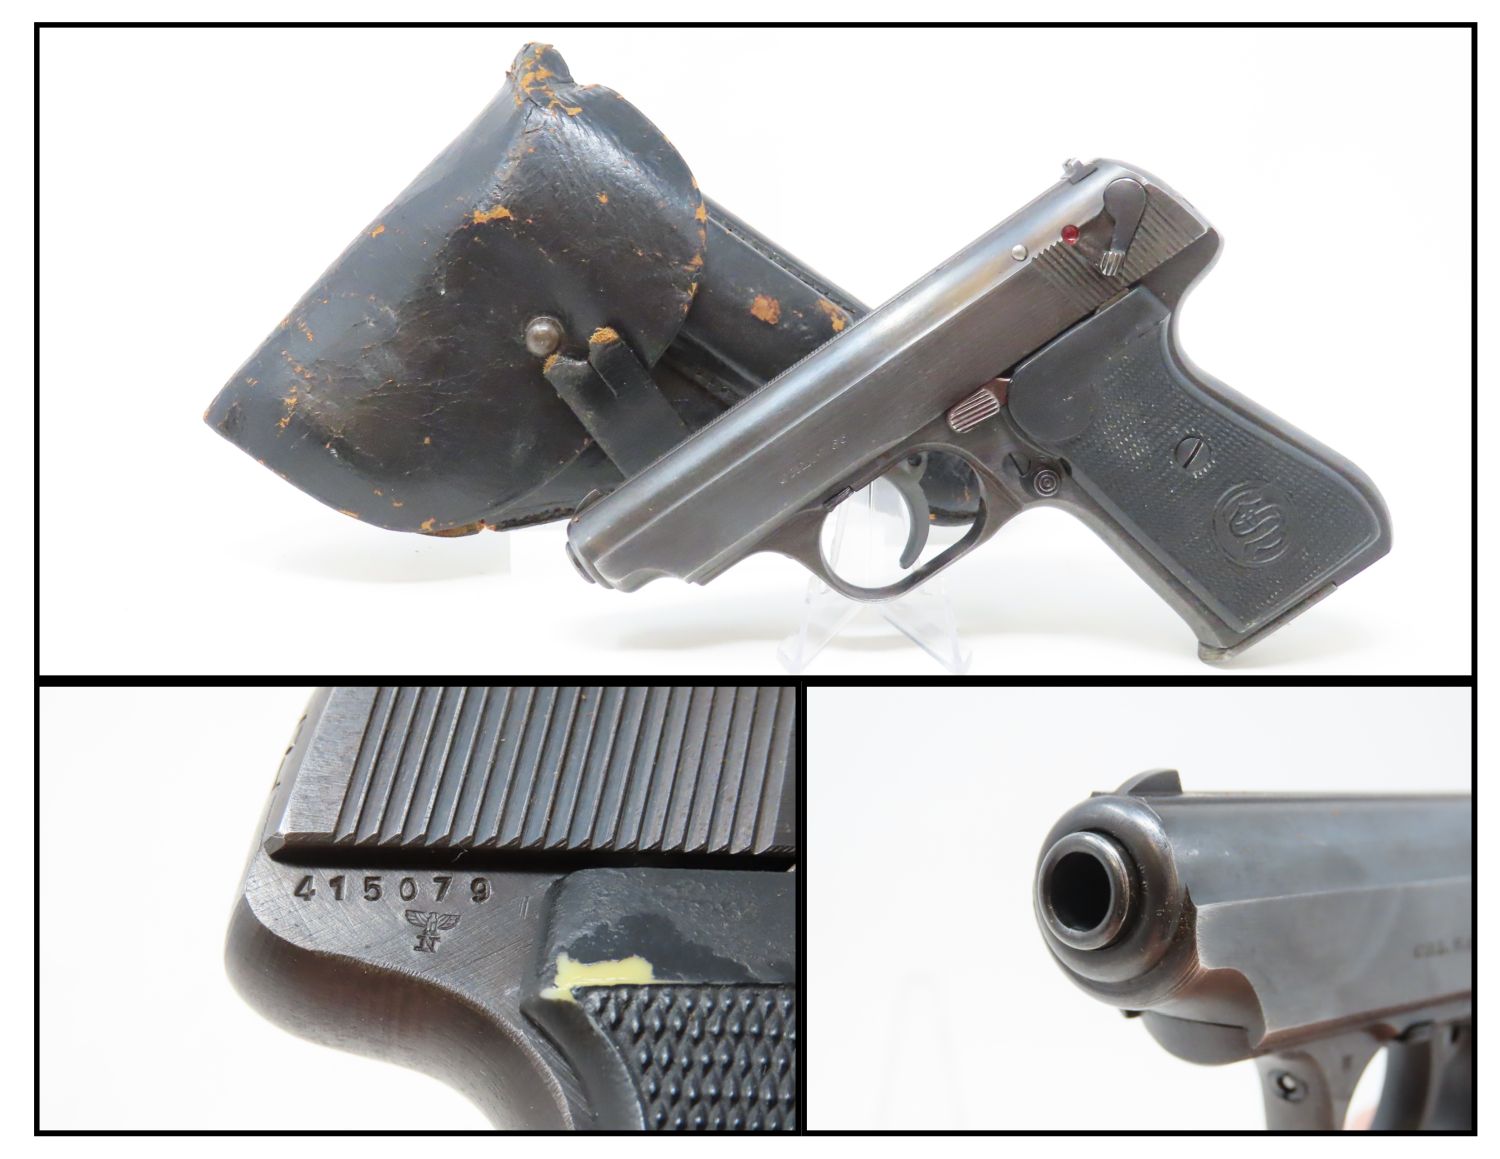 Sold at auction J.P. Sauer & Sohn Model 38H Semiautomatic Pistol Auction  Number 3785T Lot Number 1208